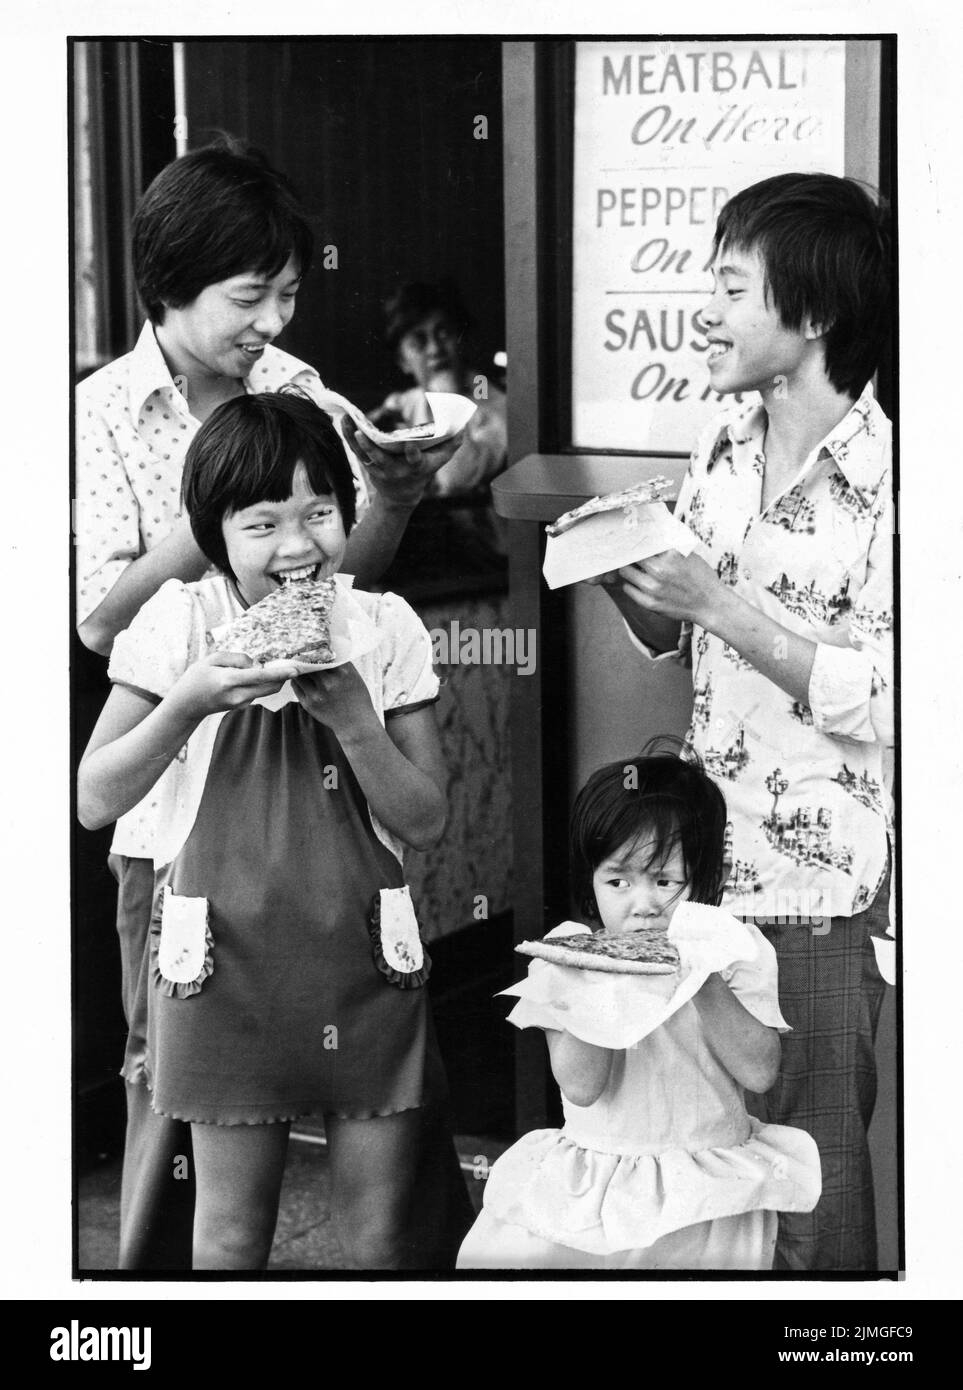 4 Vietnamese boat people settle in Queens, New York and acclimate to the new culture over slices of pizza. In 1980 in NYC. Stock Photo